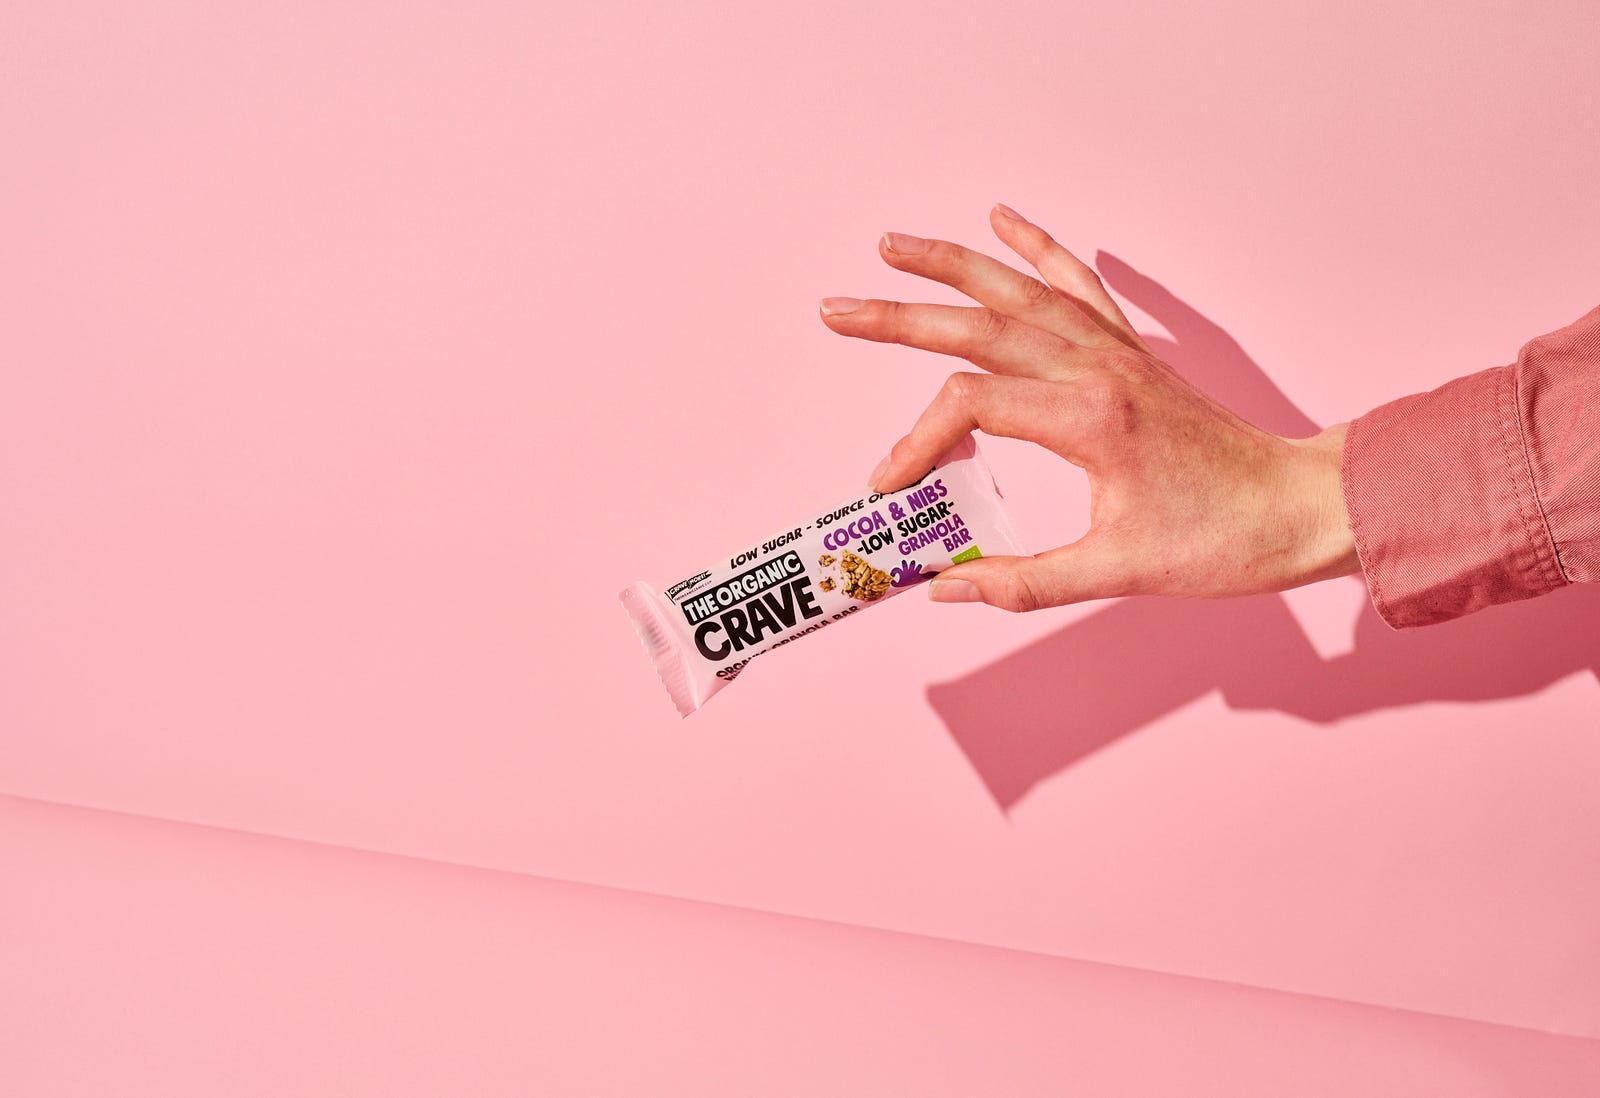 A hand emerges from the right to pinch (with thumb and index finger) a protein bar. Pink background. Choose a bar that meets your diet aims, but you shouldn’t use protein bars as your main nutrition source.